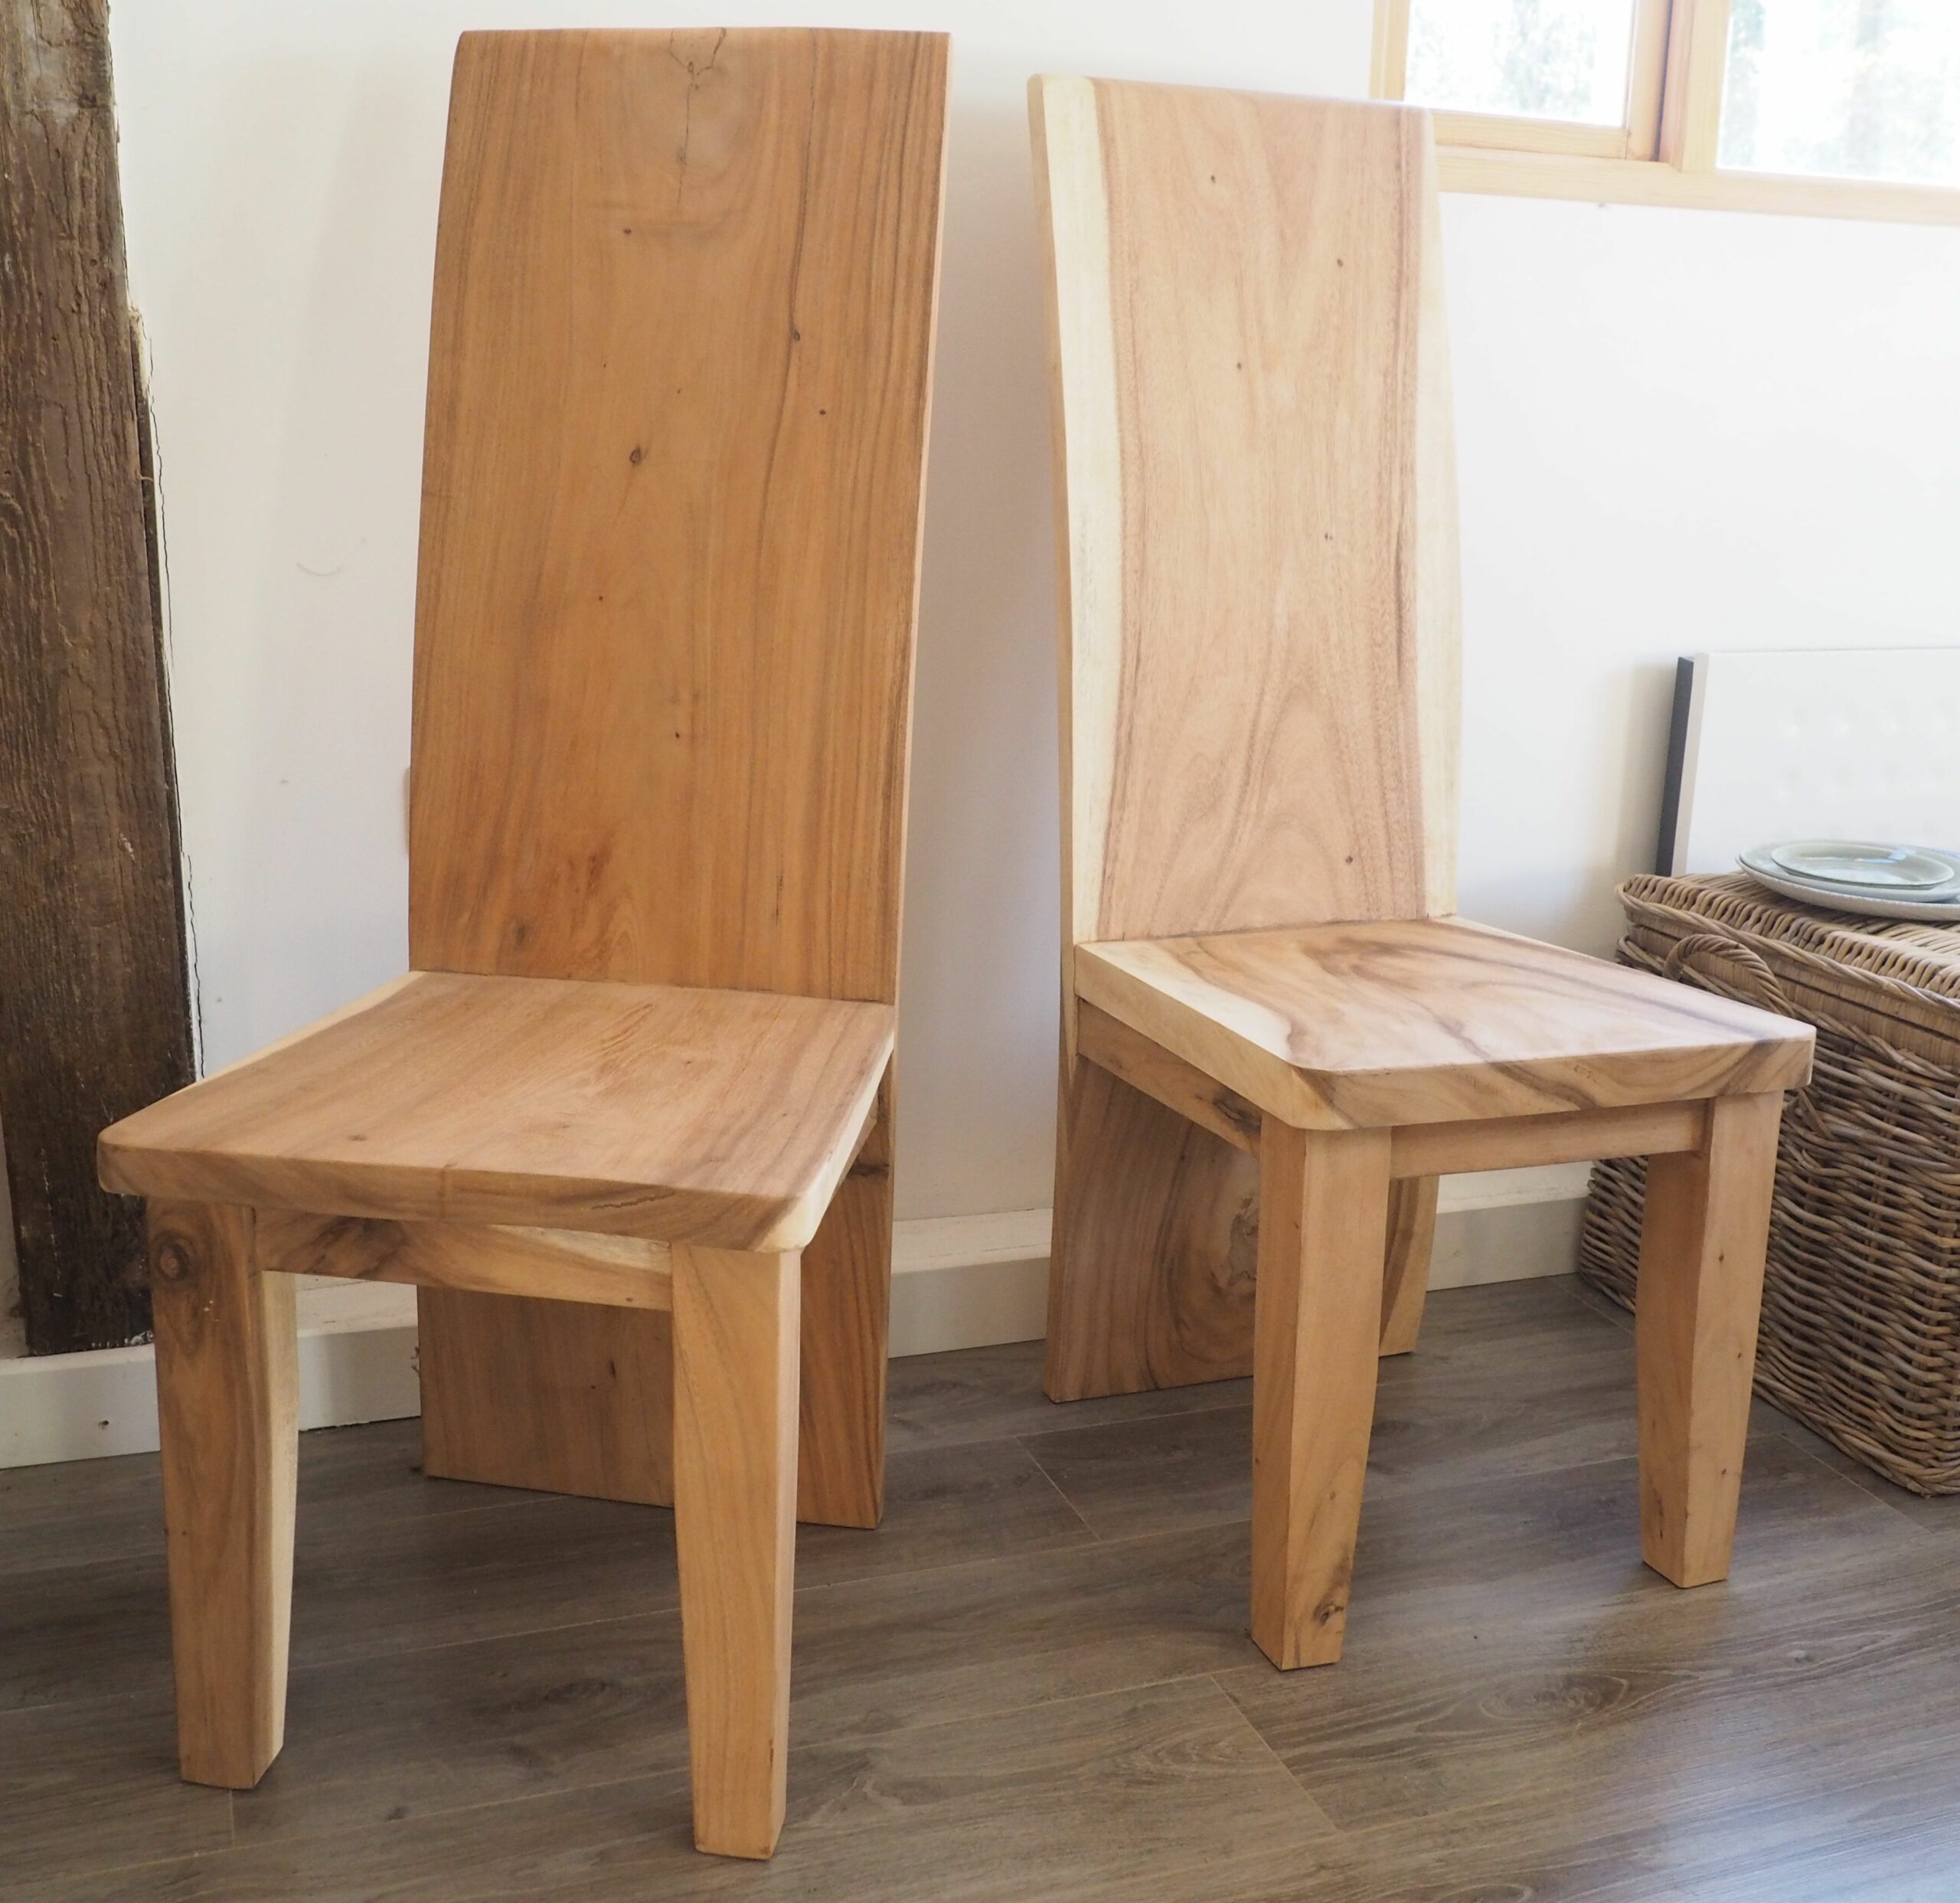 Indonesian wood dining table and chairs